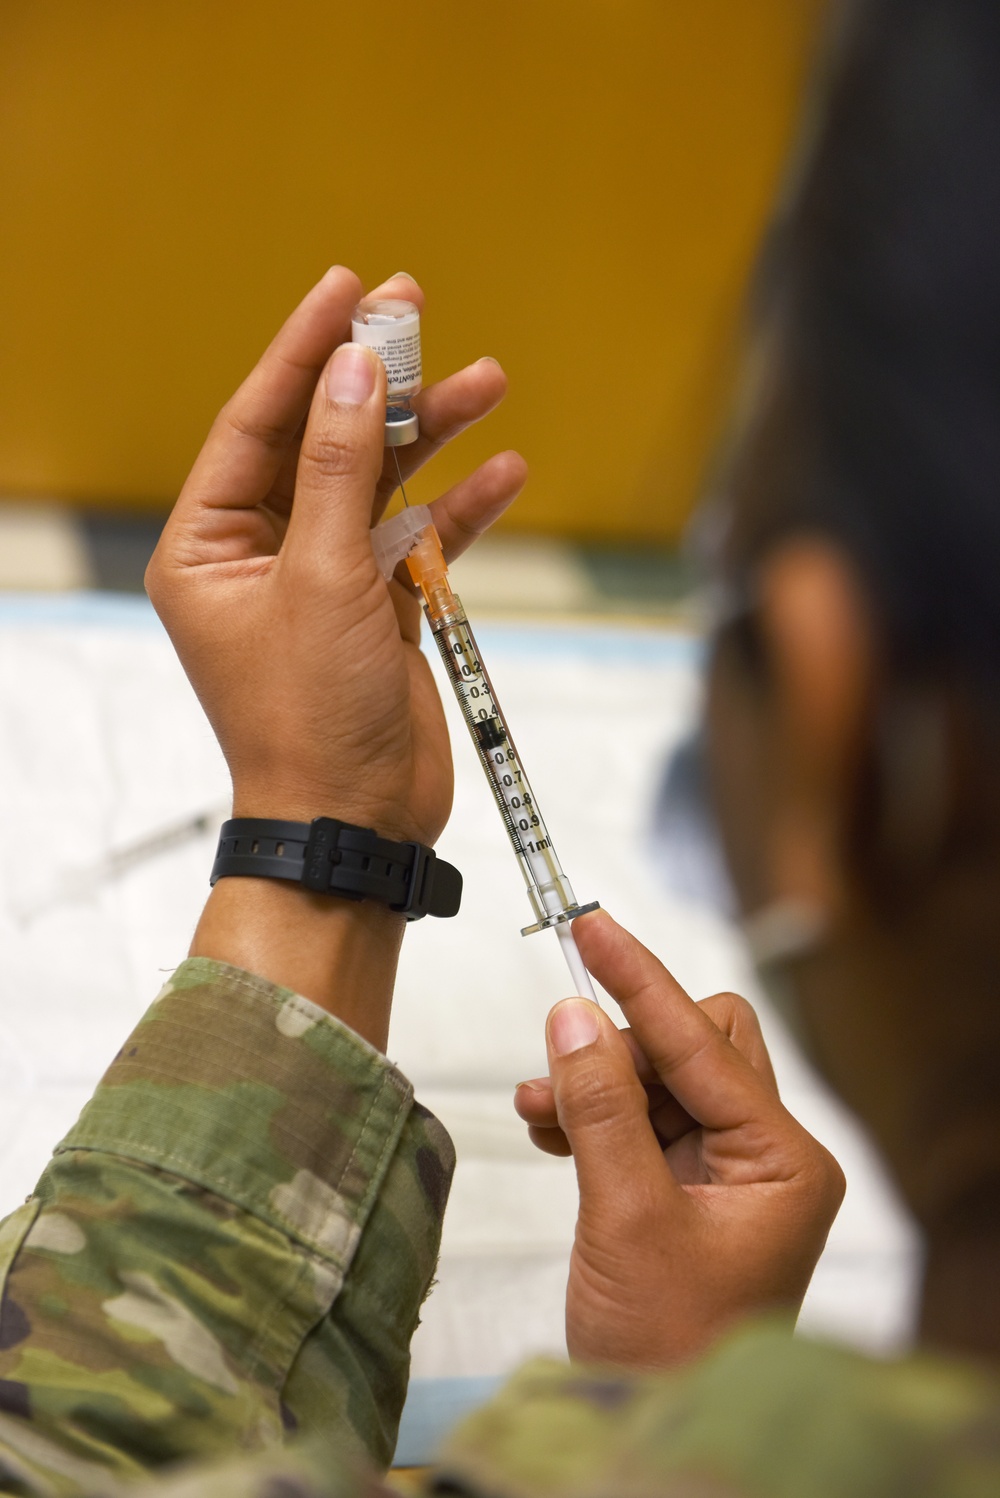 COVID-19 vaccines available at McChord Airman’s Clinic